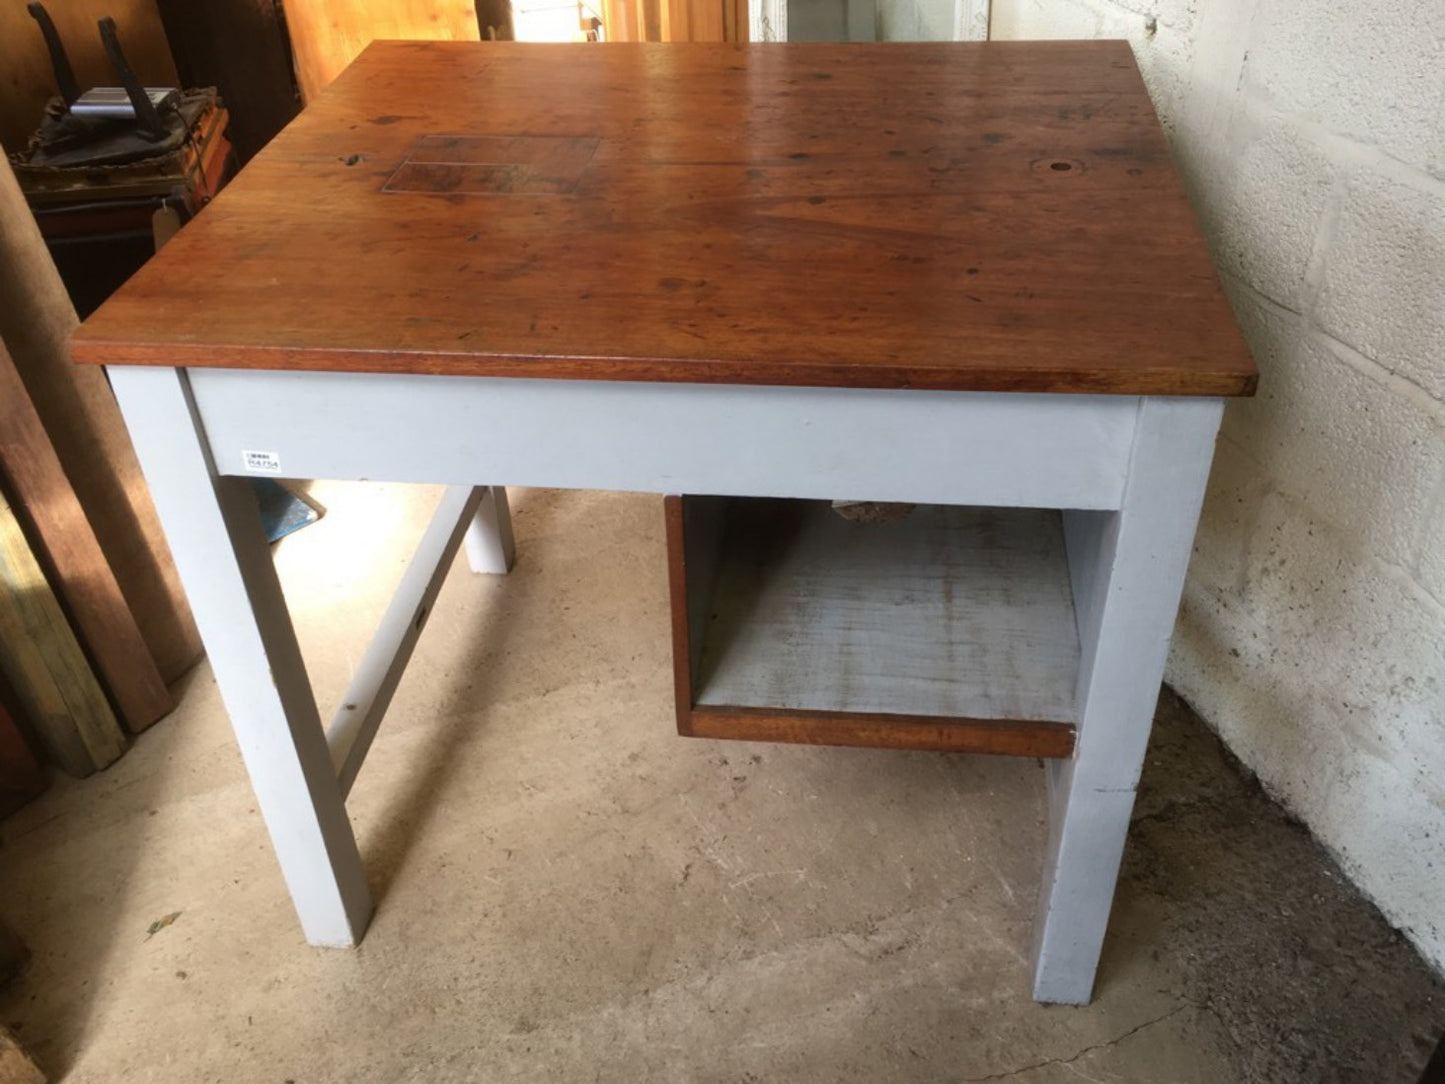 36 1/4” By 42” Interesting Old Teak Kitchen Middle Island Table Unit Worktop